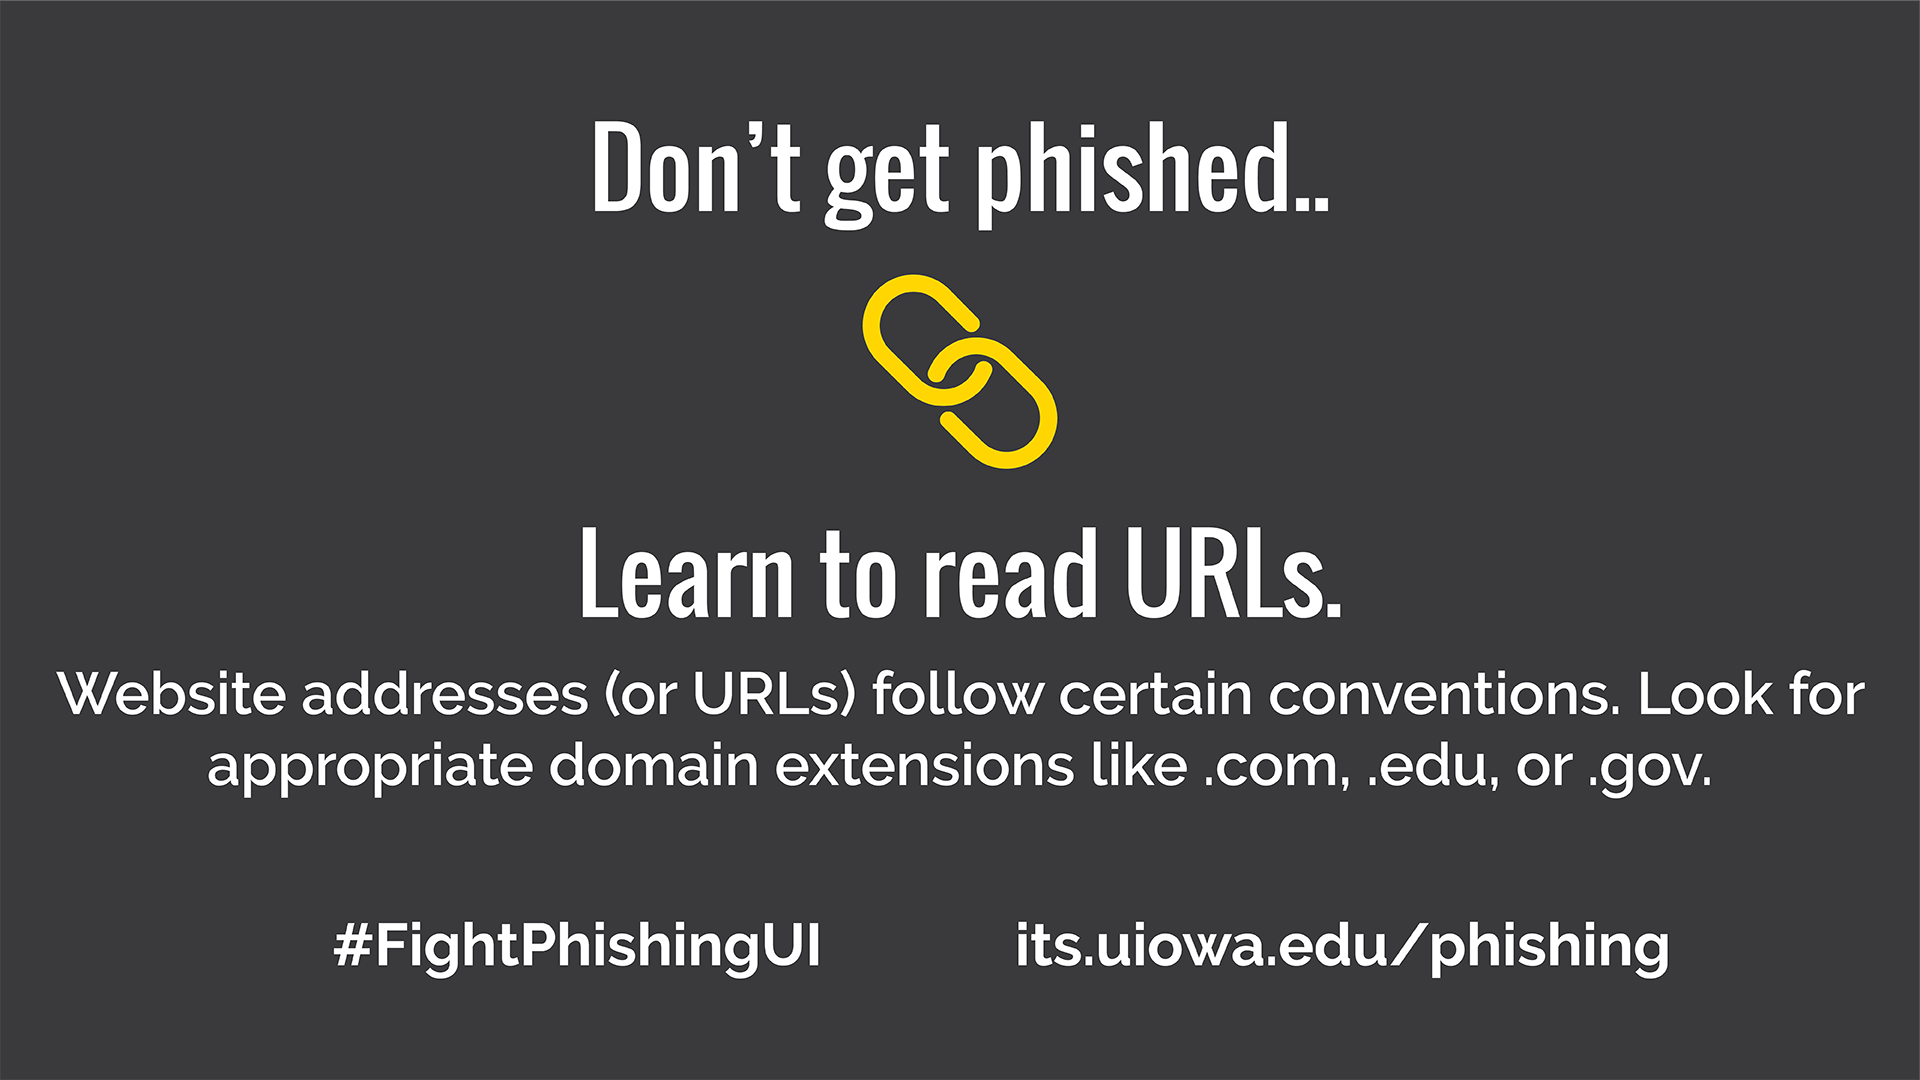 Don't get phished.. Learn to read URLs. Website addresses for URLS follow certain connections. Look for appropriate domain extensions like .com, .edu, or .gov. . #FightPhishingUI its.uiowa.edu/phishing